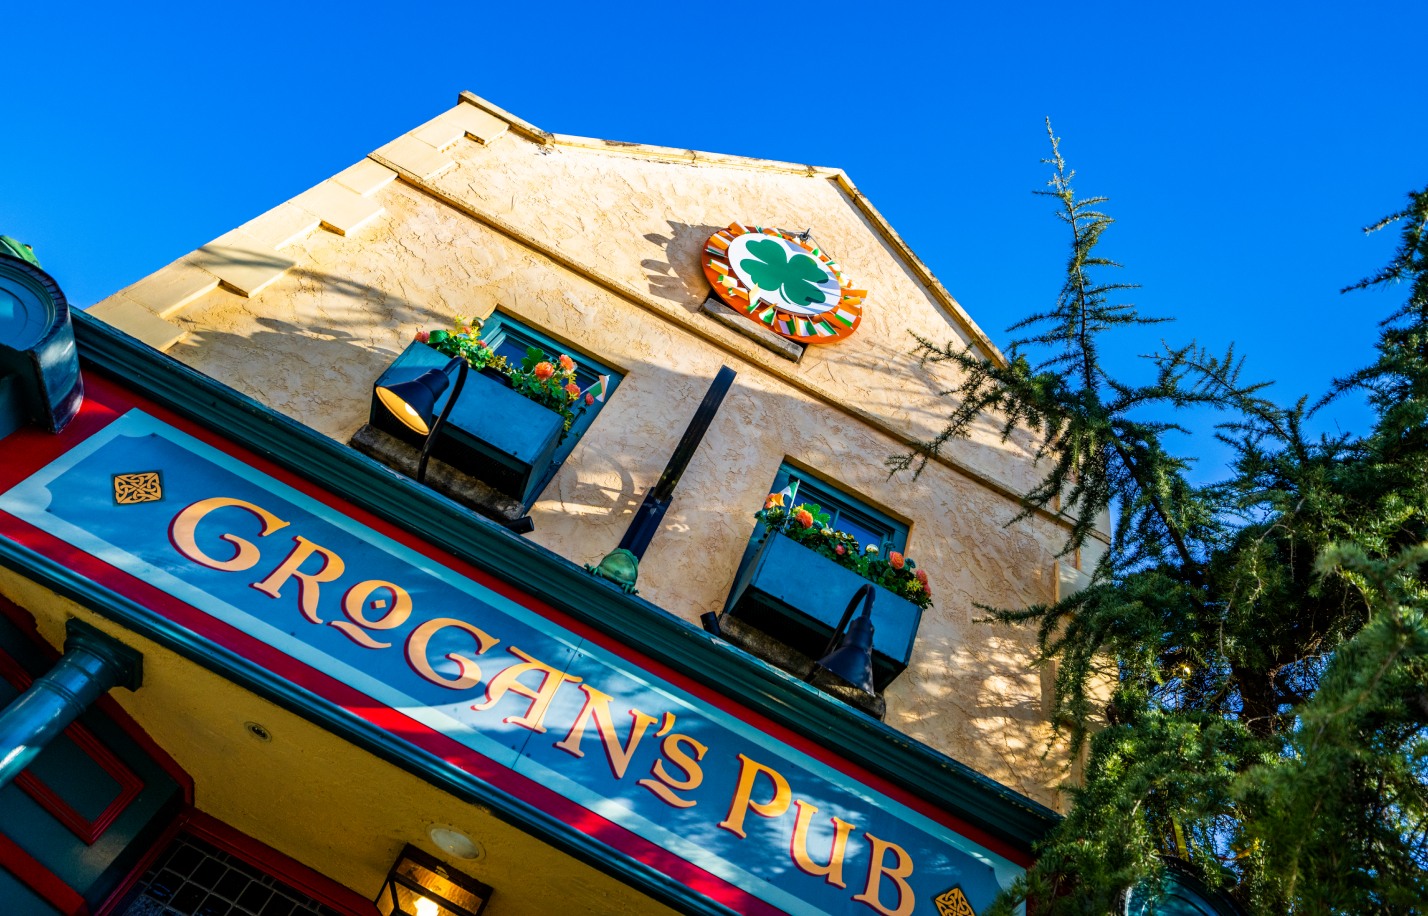 Exterior of Grogan's Irish Pub during the Member-Exclusive Happy Hour as part of the Member Appreciation Weekend at Busch Gardens Williamsburg.